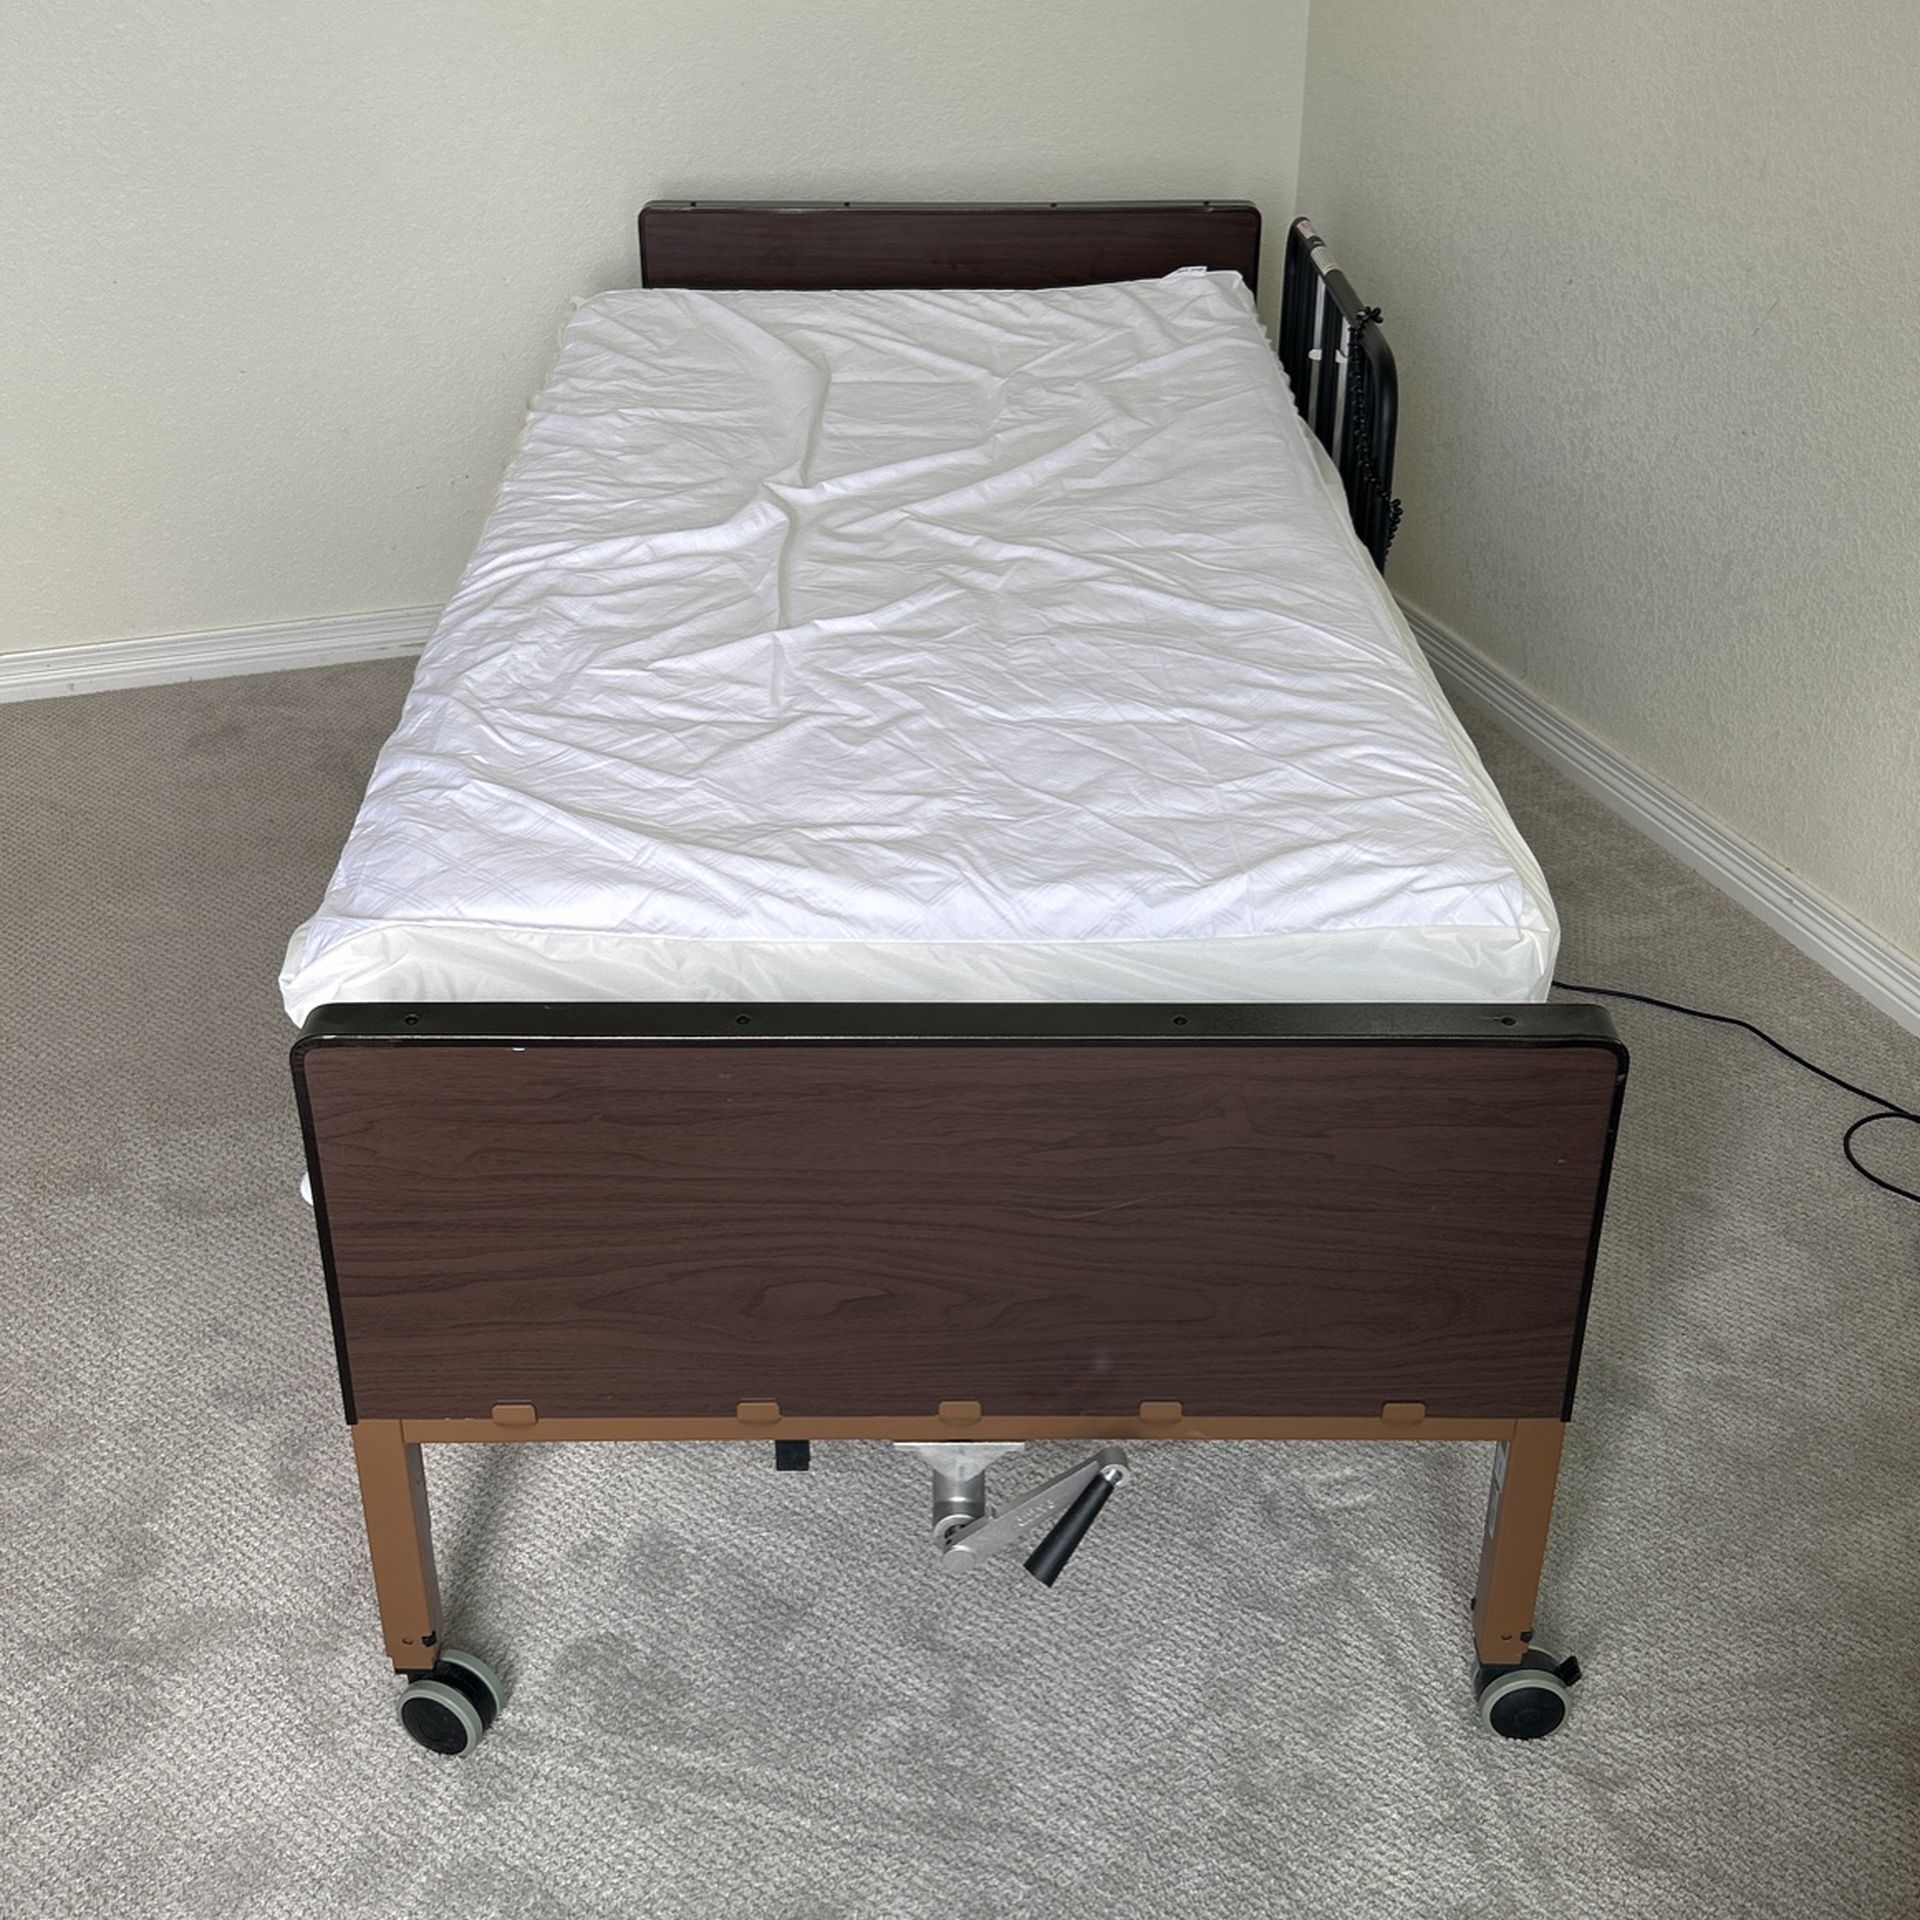 Hospital Bed With Side Rails